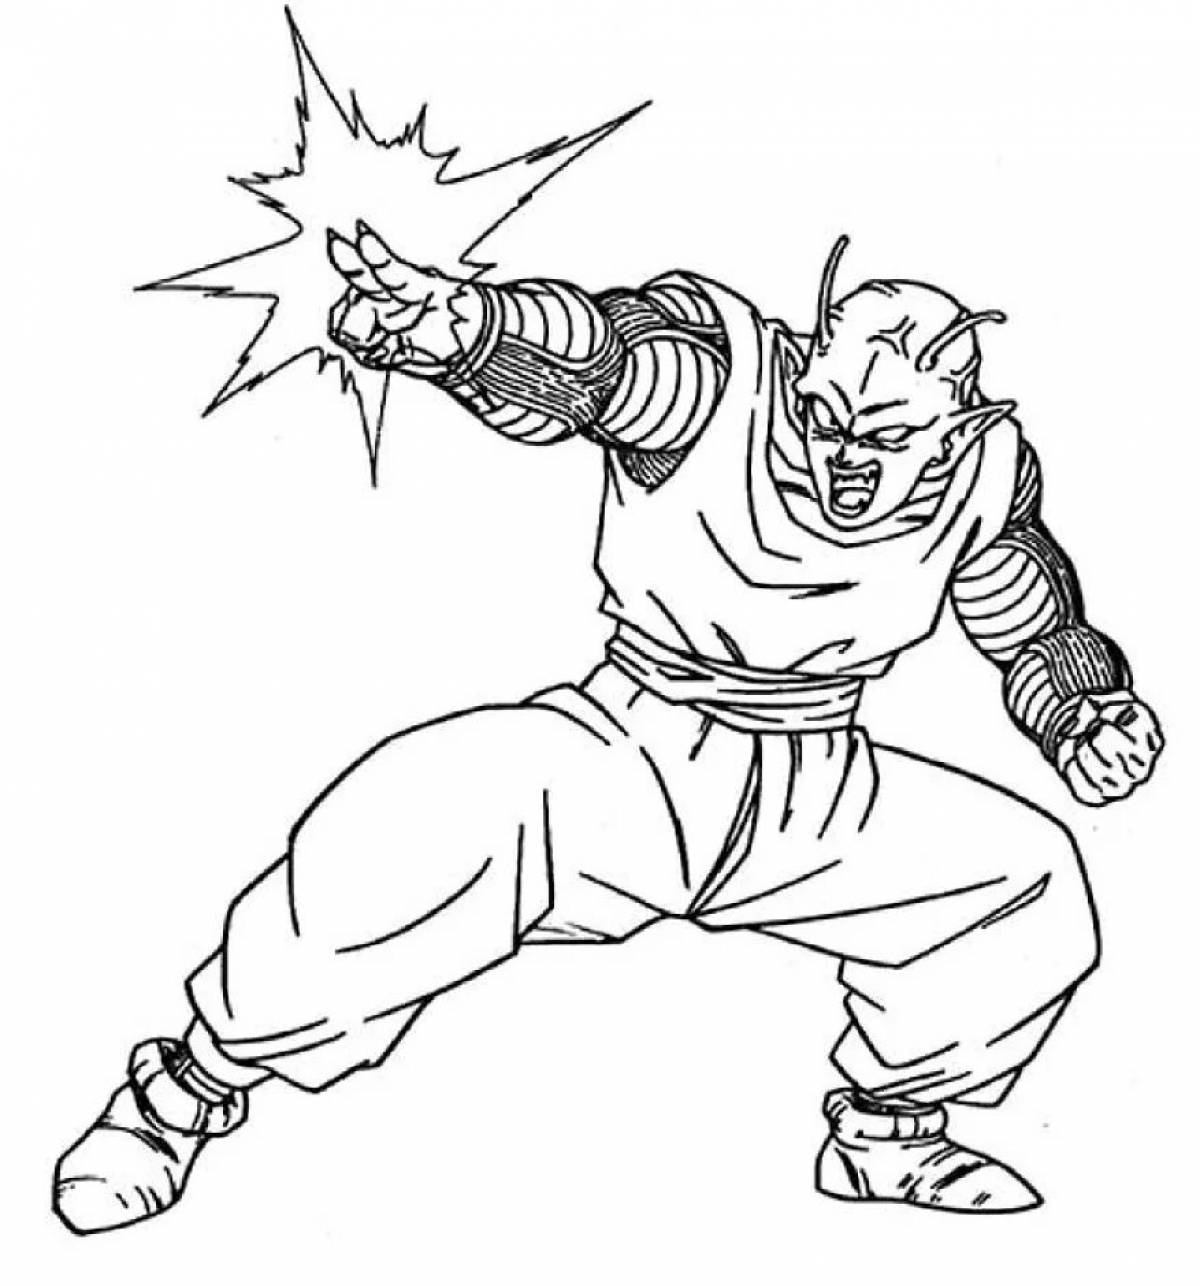 Inspirational gujutsu character coloring pages for kids